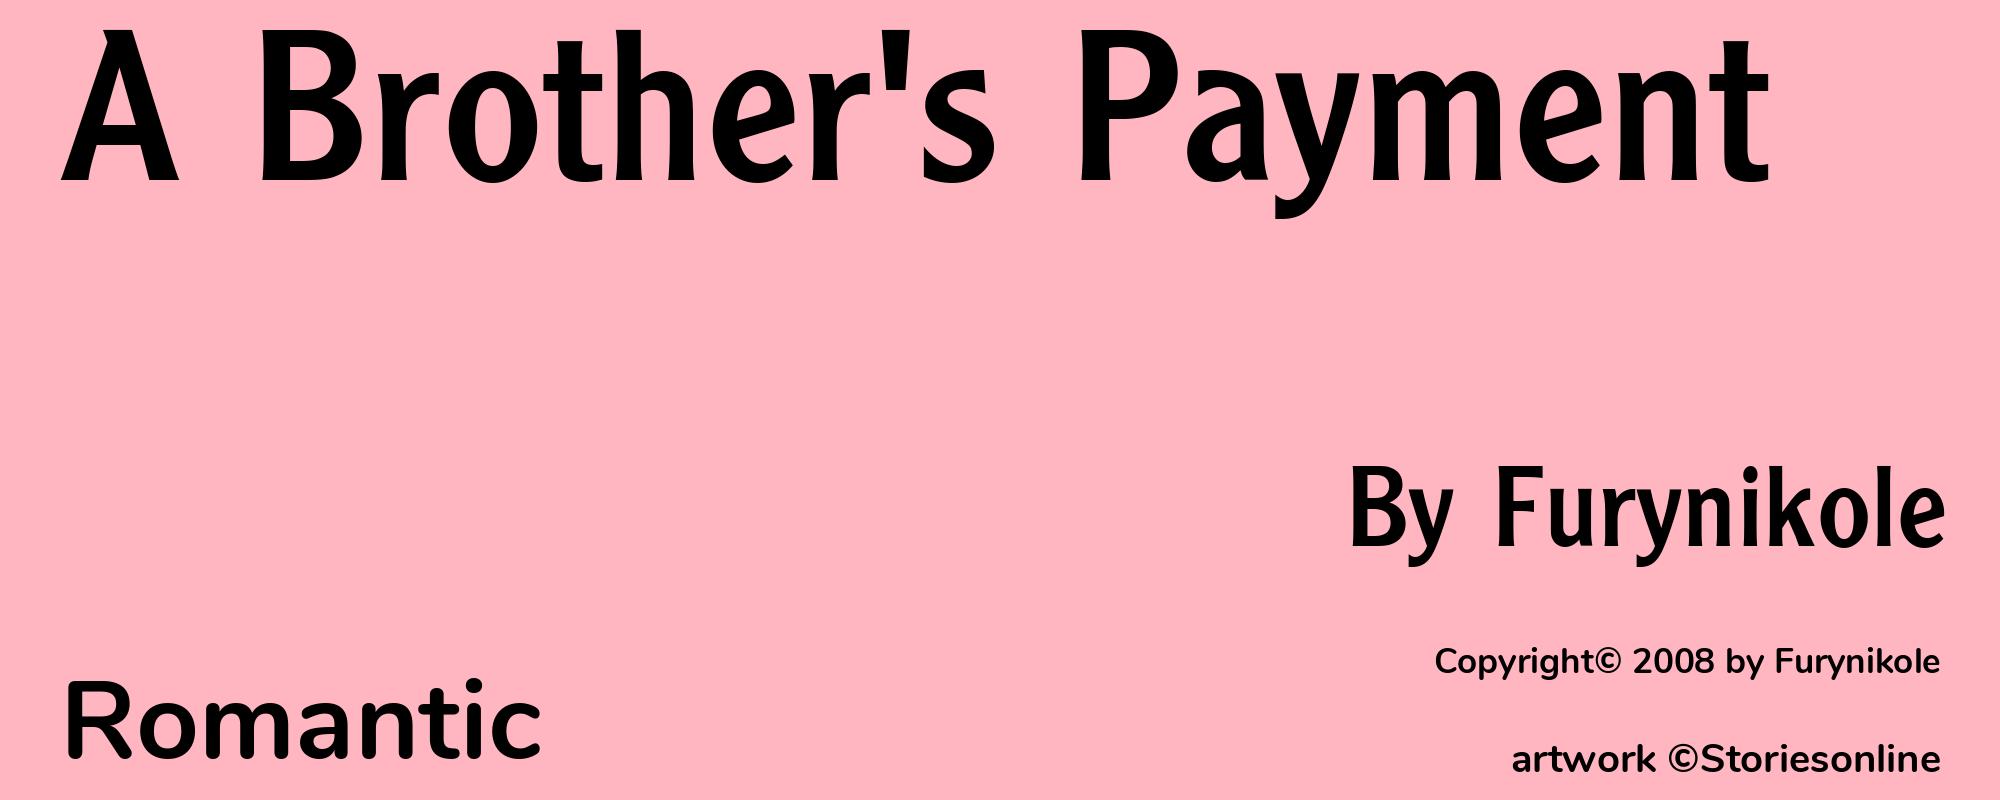 A Brother's Payment - Cover